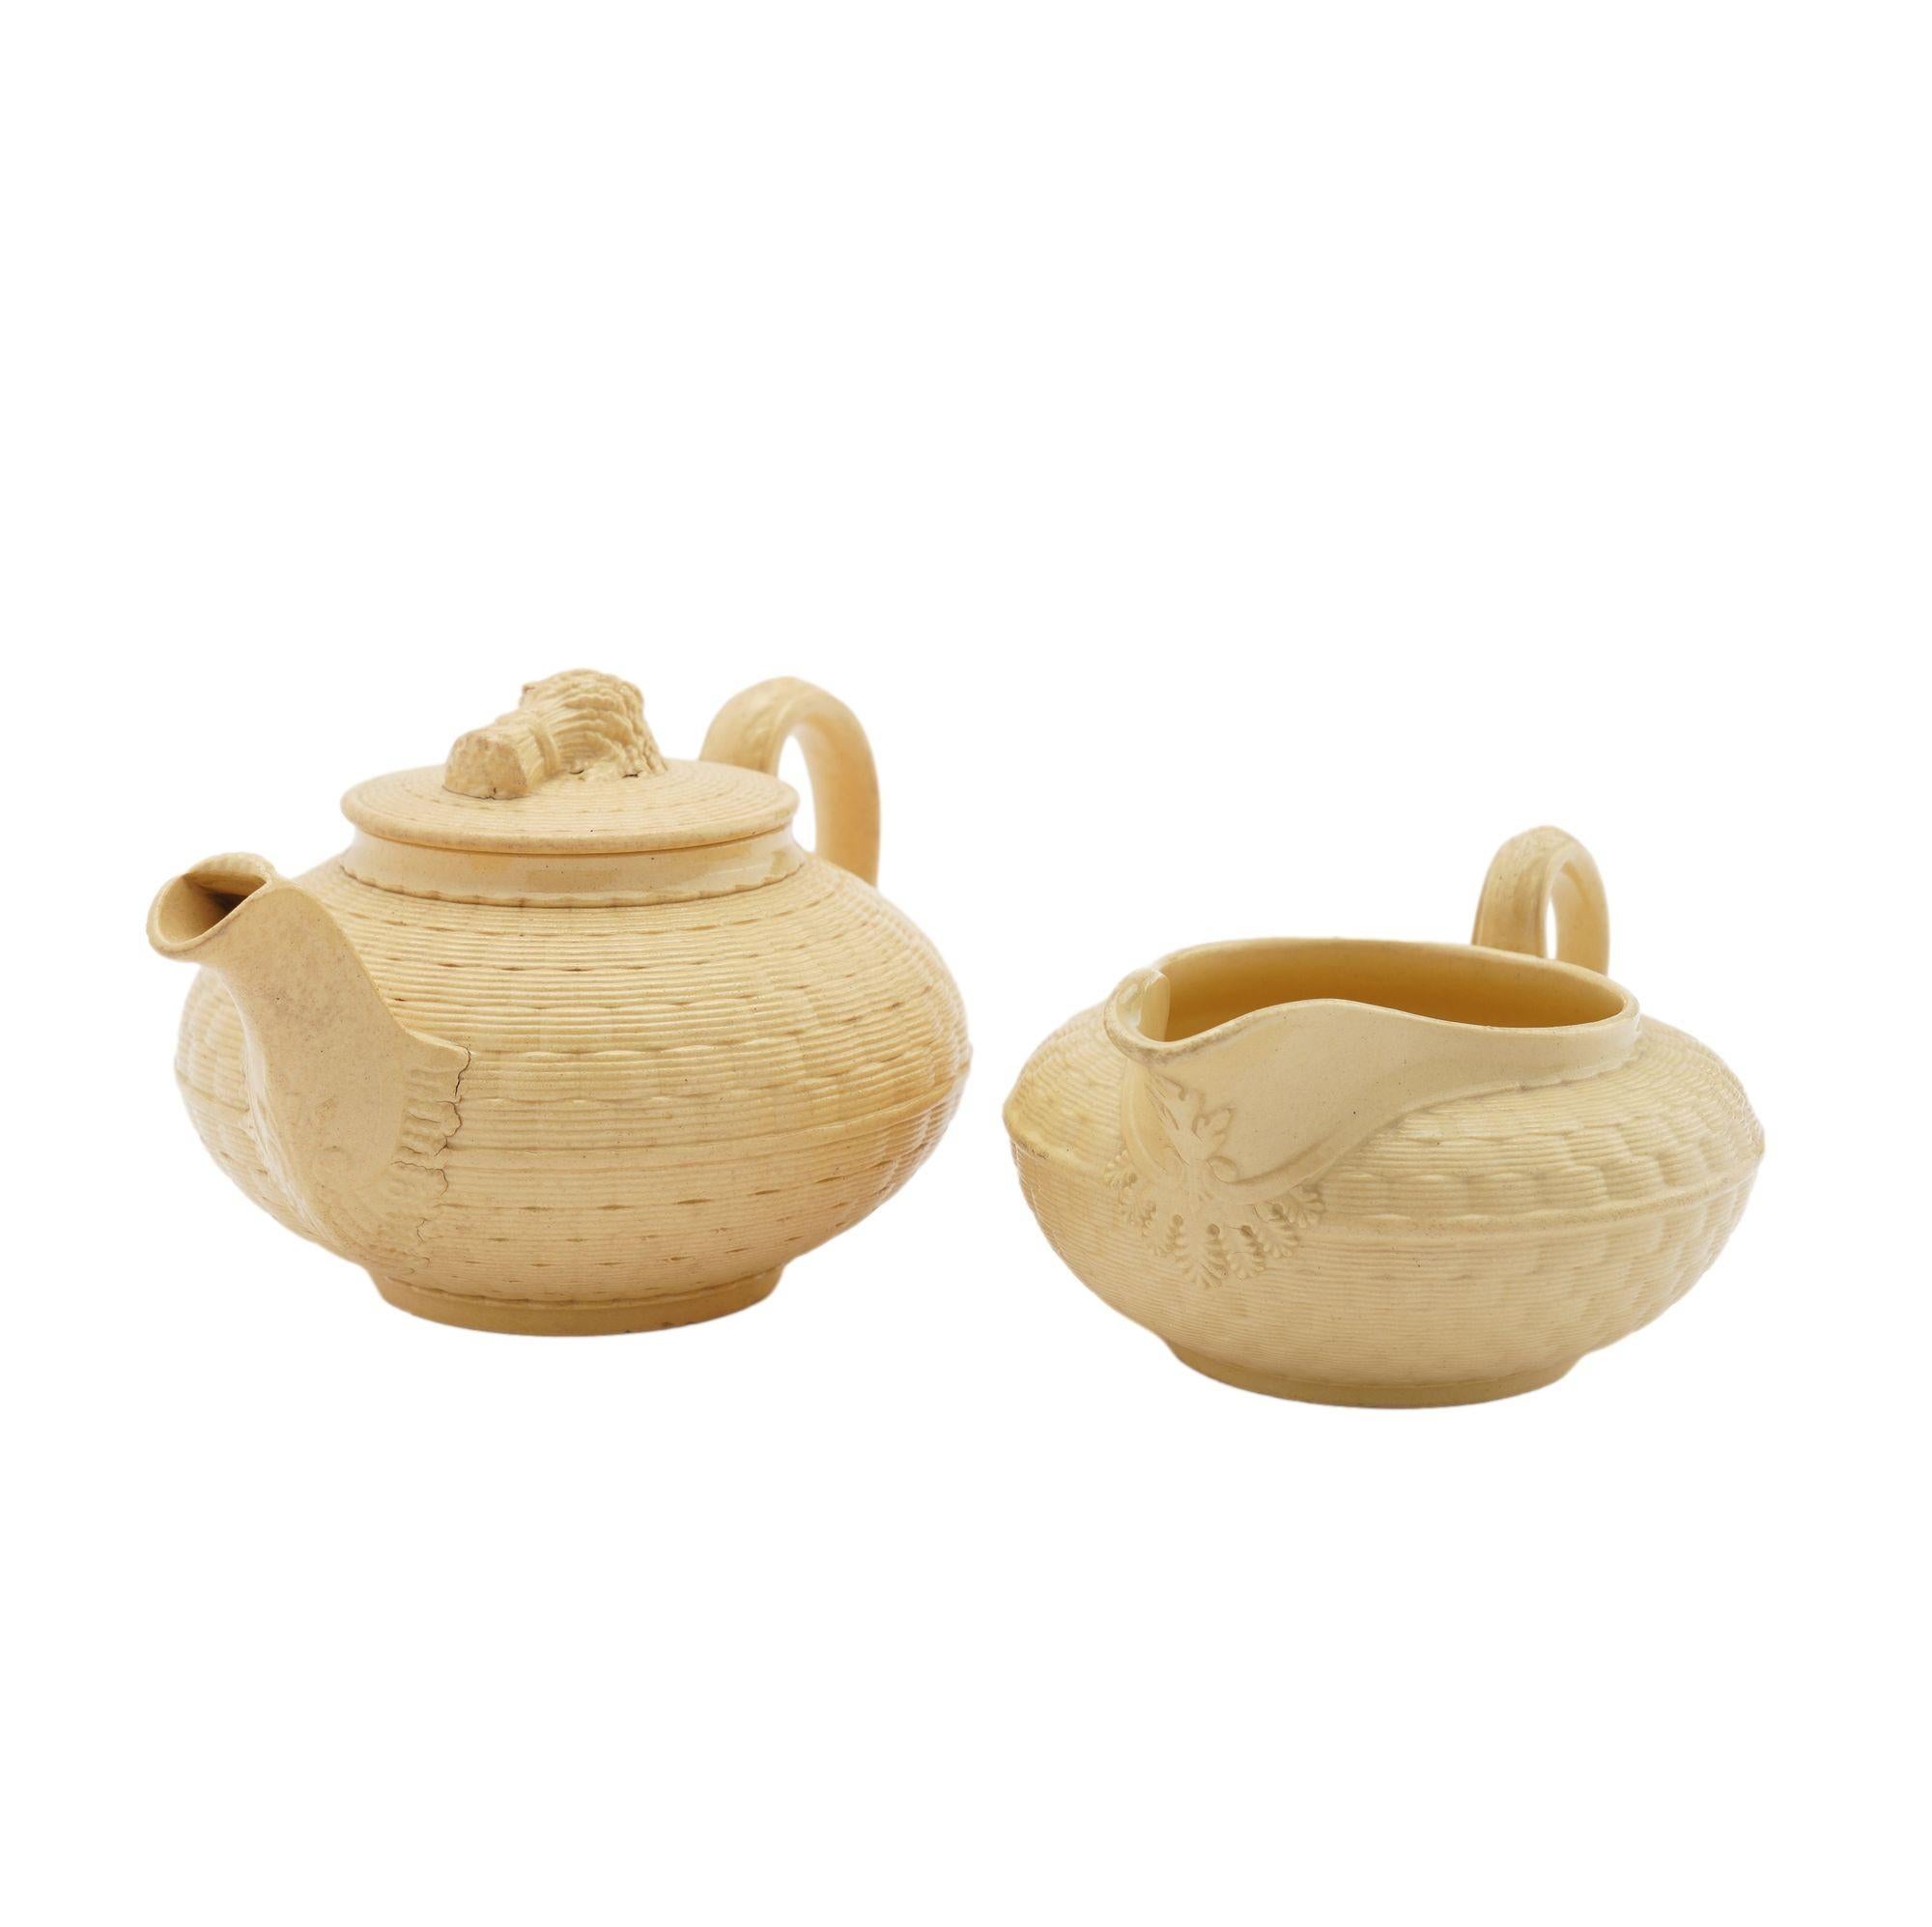 Caneware ceramic creamer with impressed basket weave surface decoration, along with matching teapot with lid finial in the form of a sheaf of wheat.
Impressed on the underside: Wedgwood

England, circa 1817.

Dimensions: Teapot: 5-3/4” L x 3-3/4” W